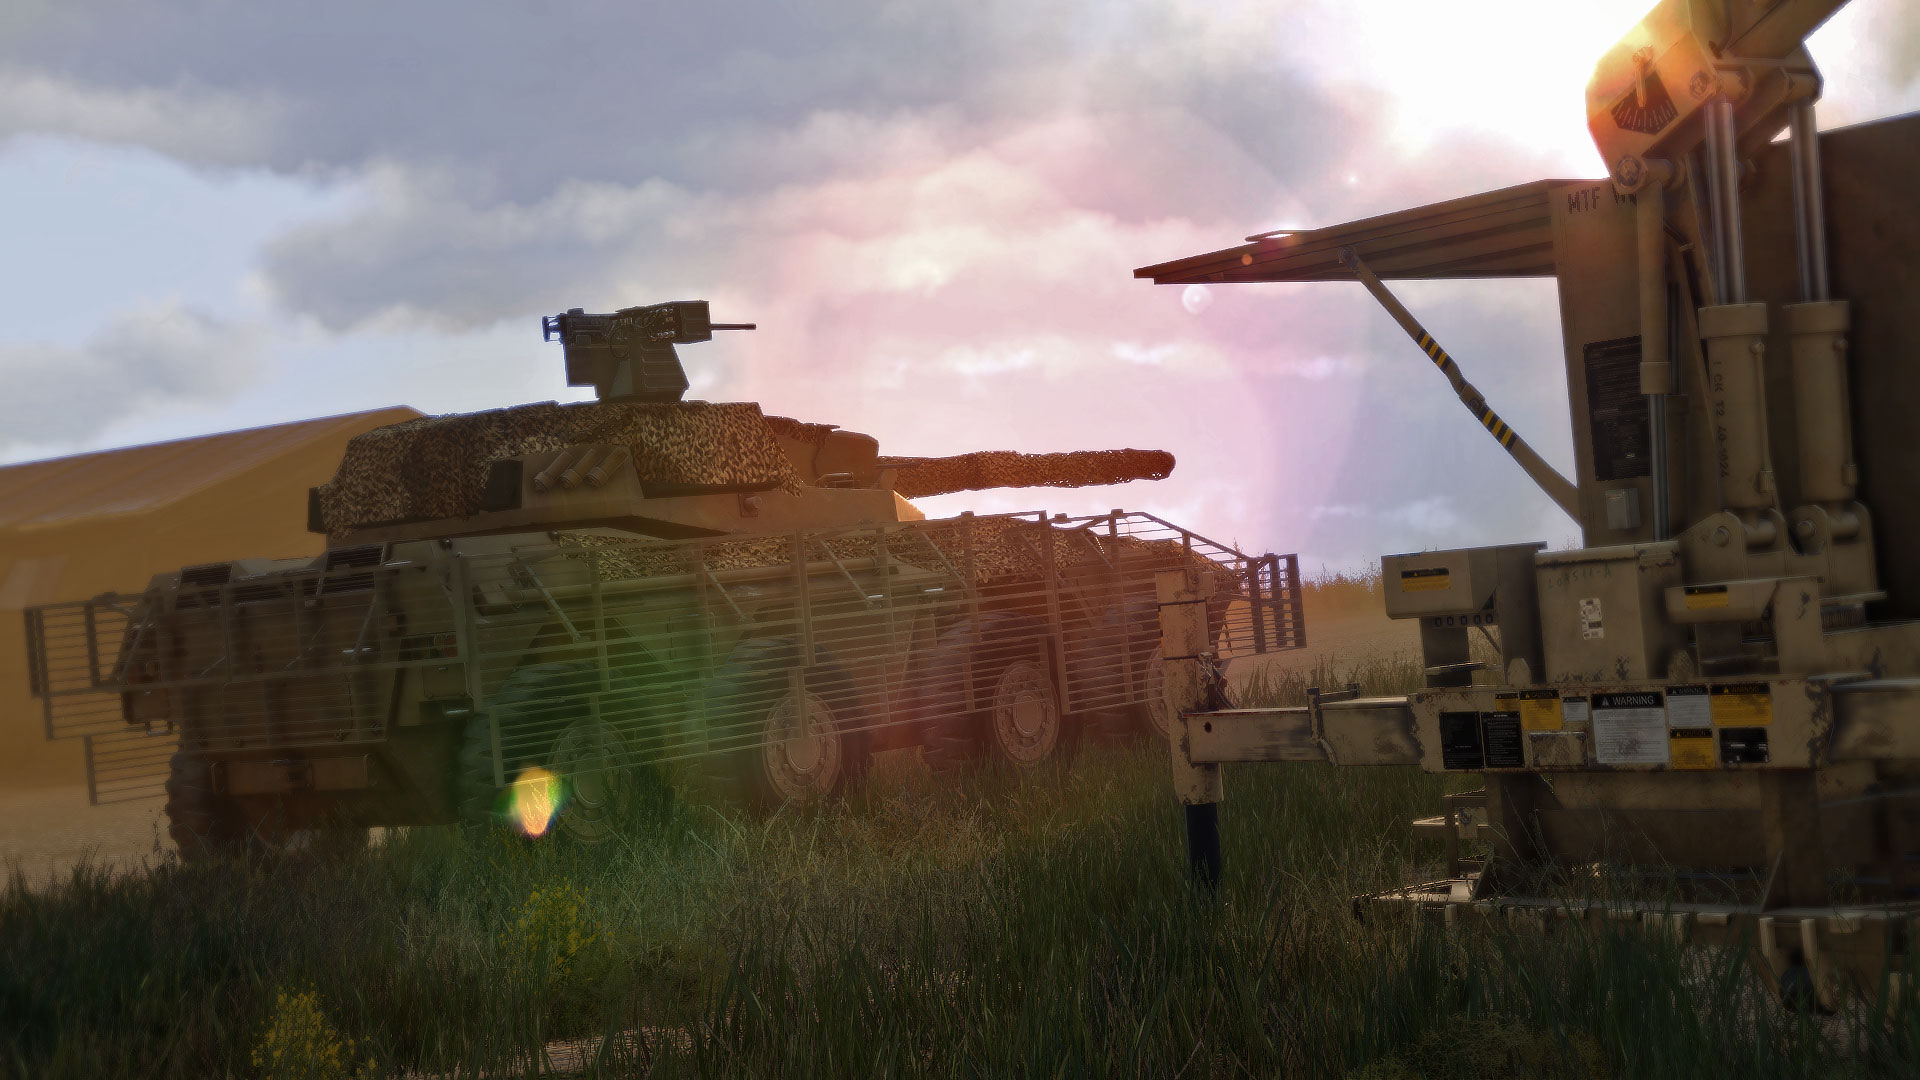 Arma 3 beta brings more vehicles, larger scale – Destructoid